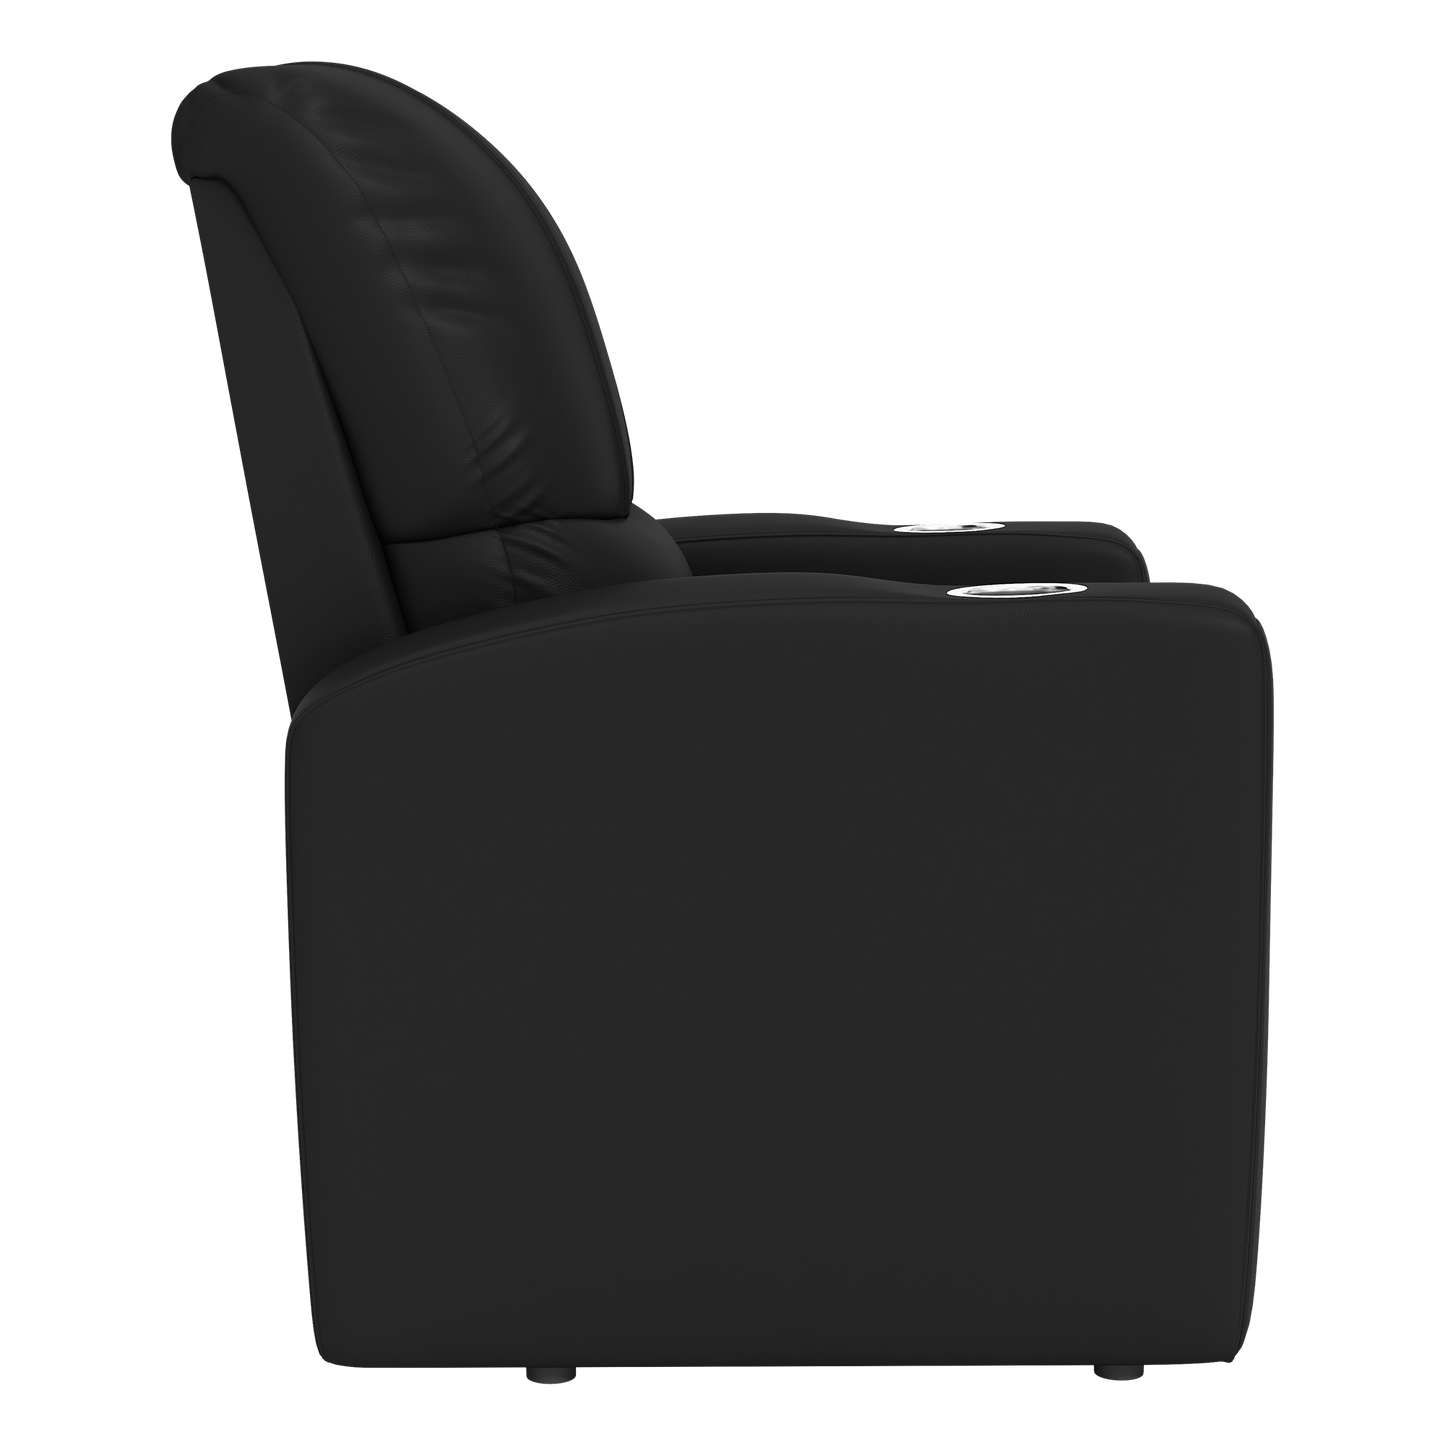 Stealth Recliner with  New Orleans Saints Primary Logo